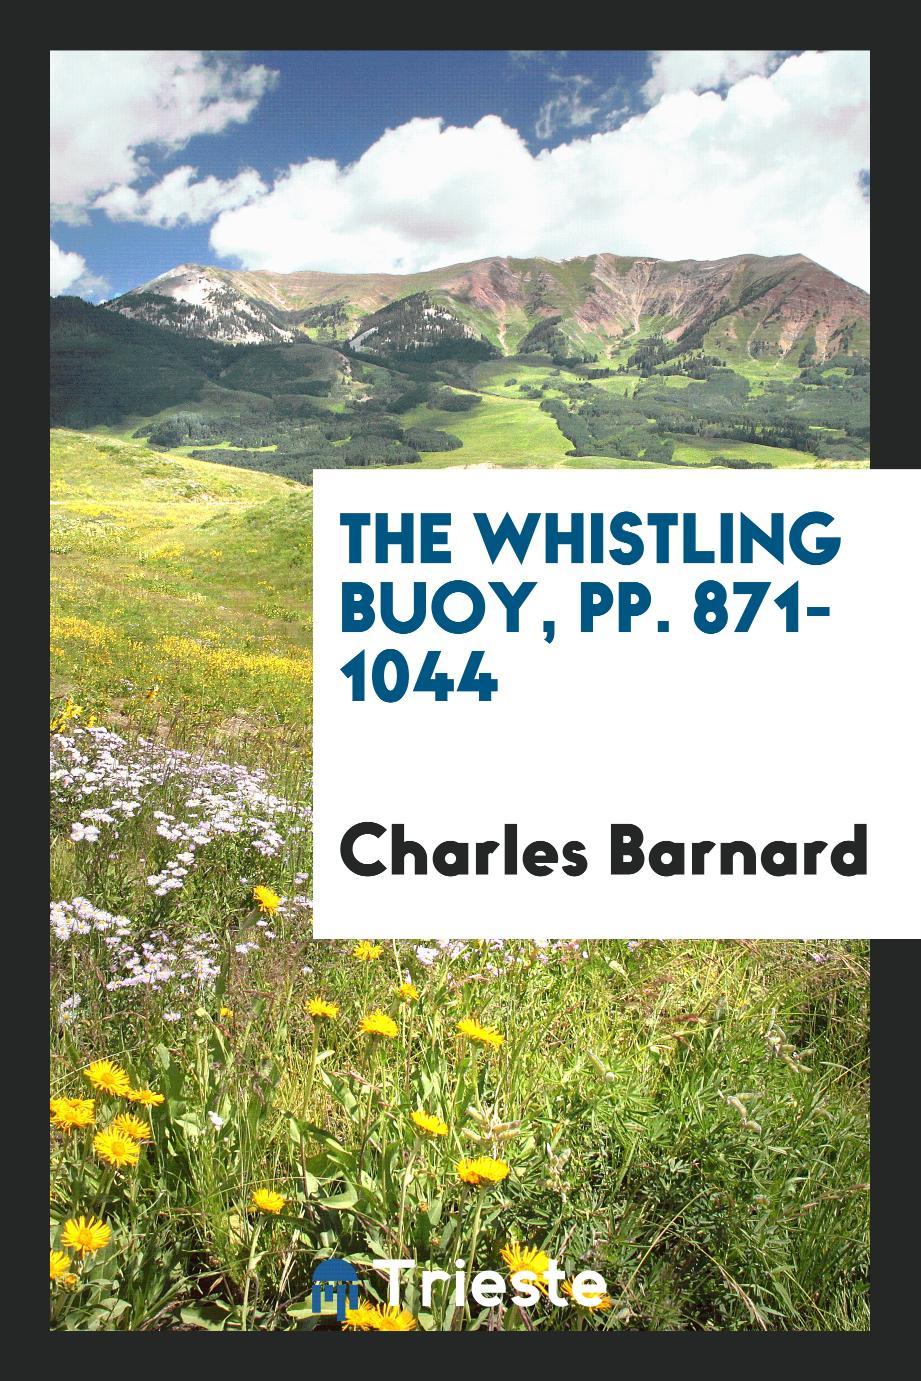 The Whistling Buoy, pp. 871-1044